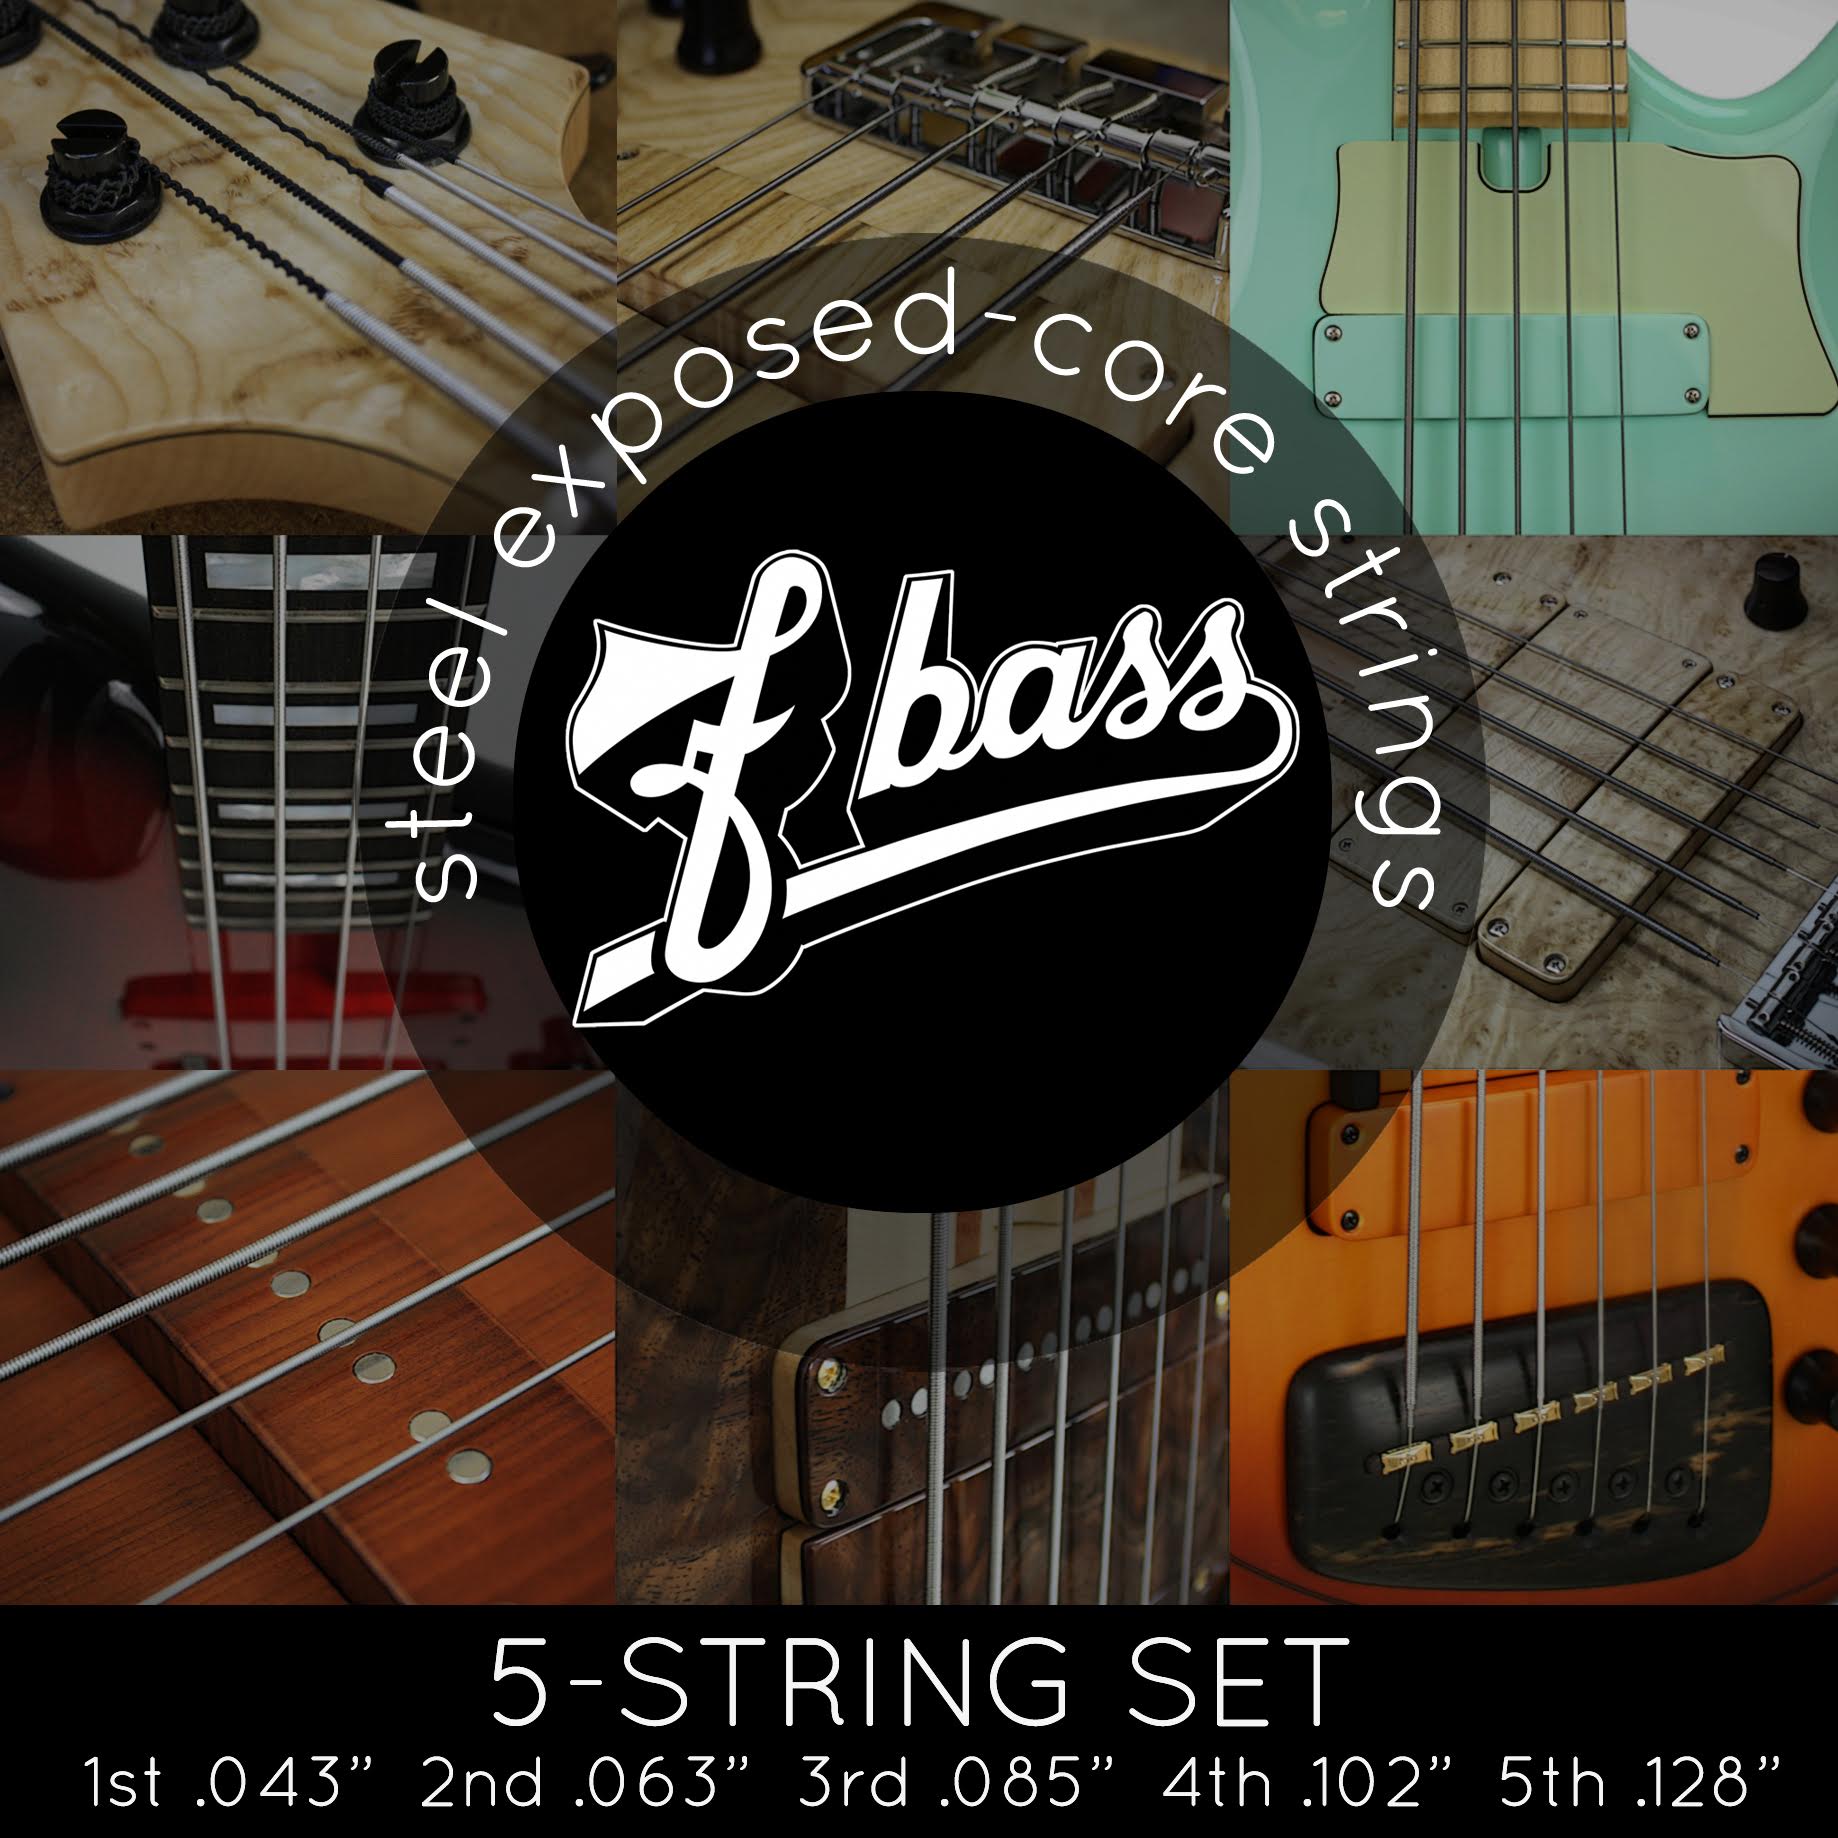 FBass 5-String Sets Exposed Core Bass Strings